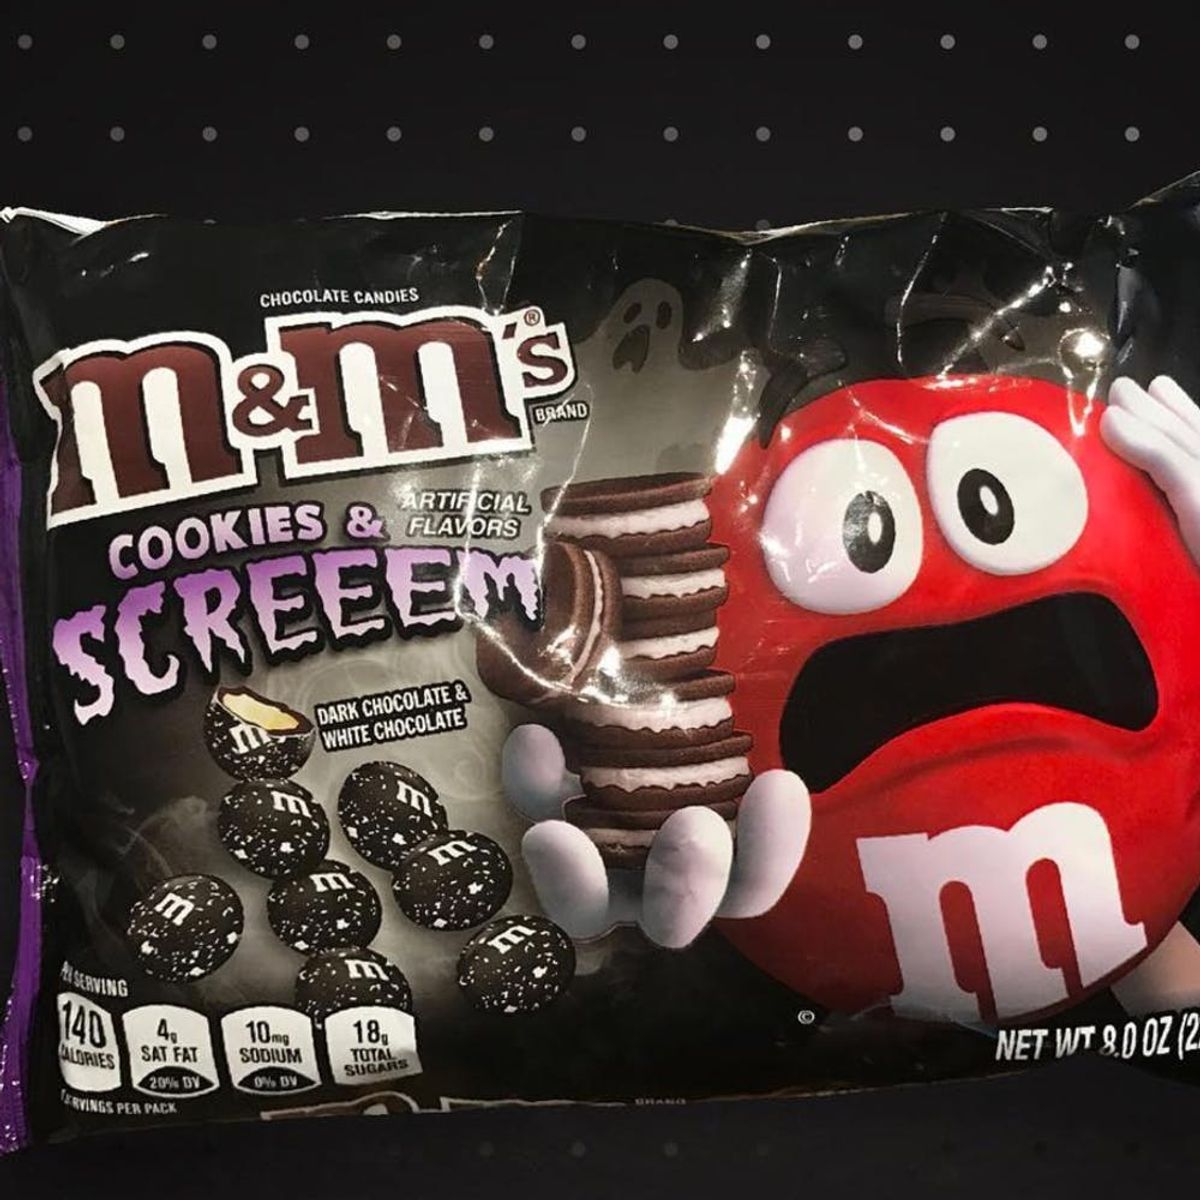 Oreo-Flavored M&Ms Arrive in Time for Halloween